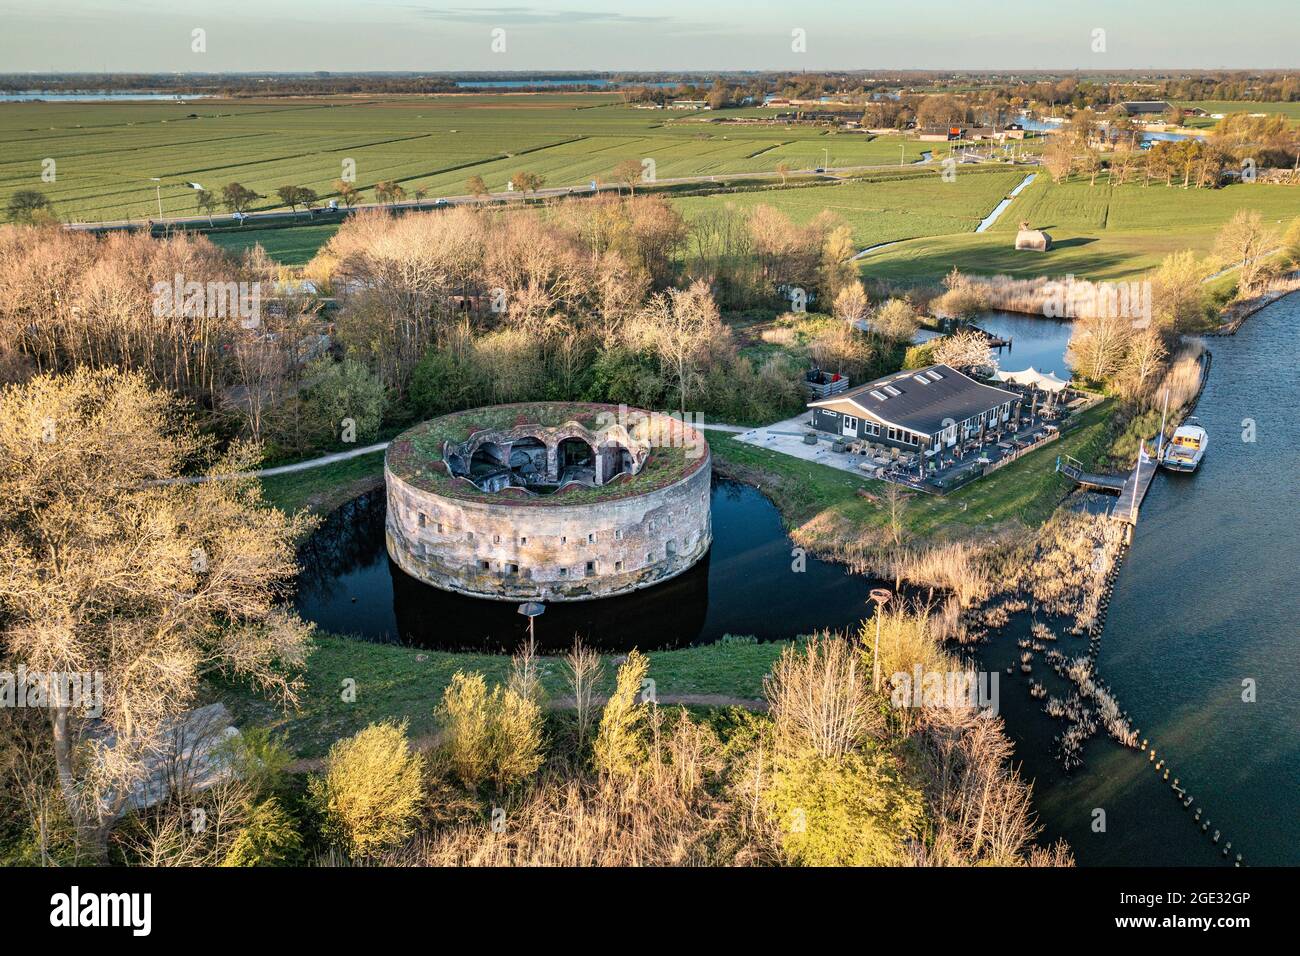 The Netherlands, Weesp, Fort Uitermeer. Amsterdam Defence Line, New Dutch Defence Line, Dutch Water Defence Lines, UNESCO World Heritage Site.Tower Fo Stock Photo